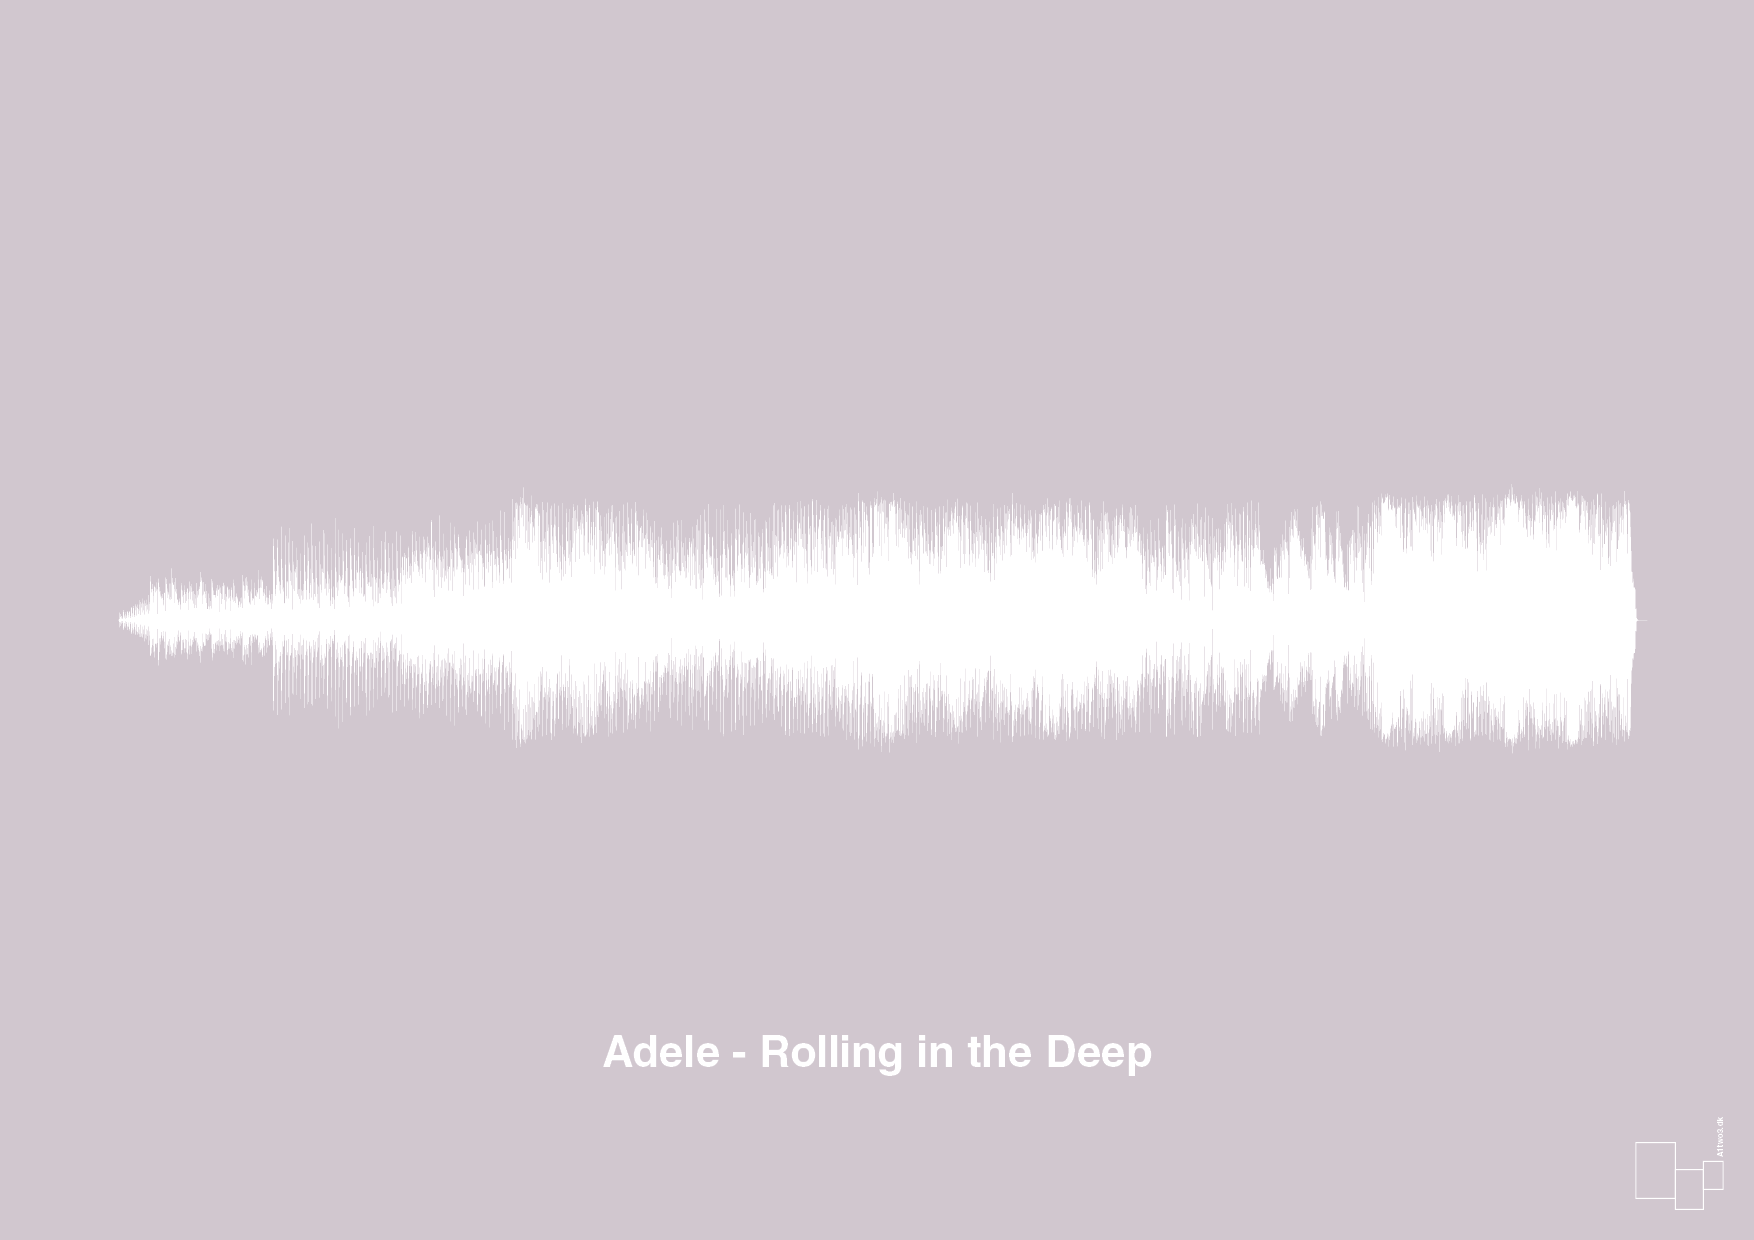 adele - rolling in the deep - Plakat med Musik i Dusty Lilac